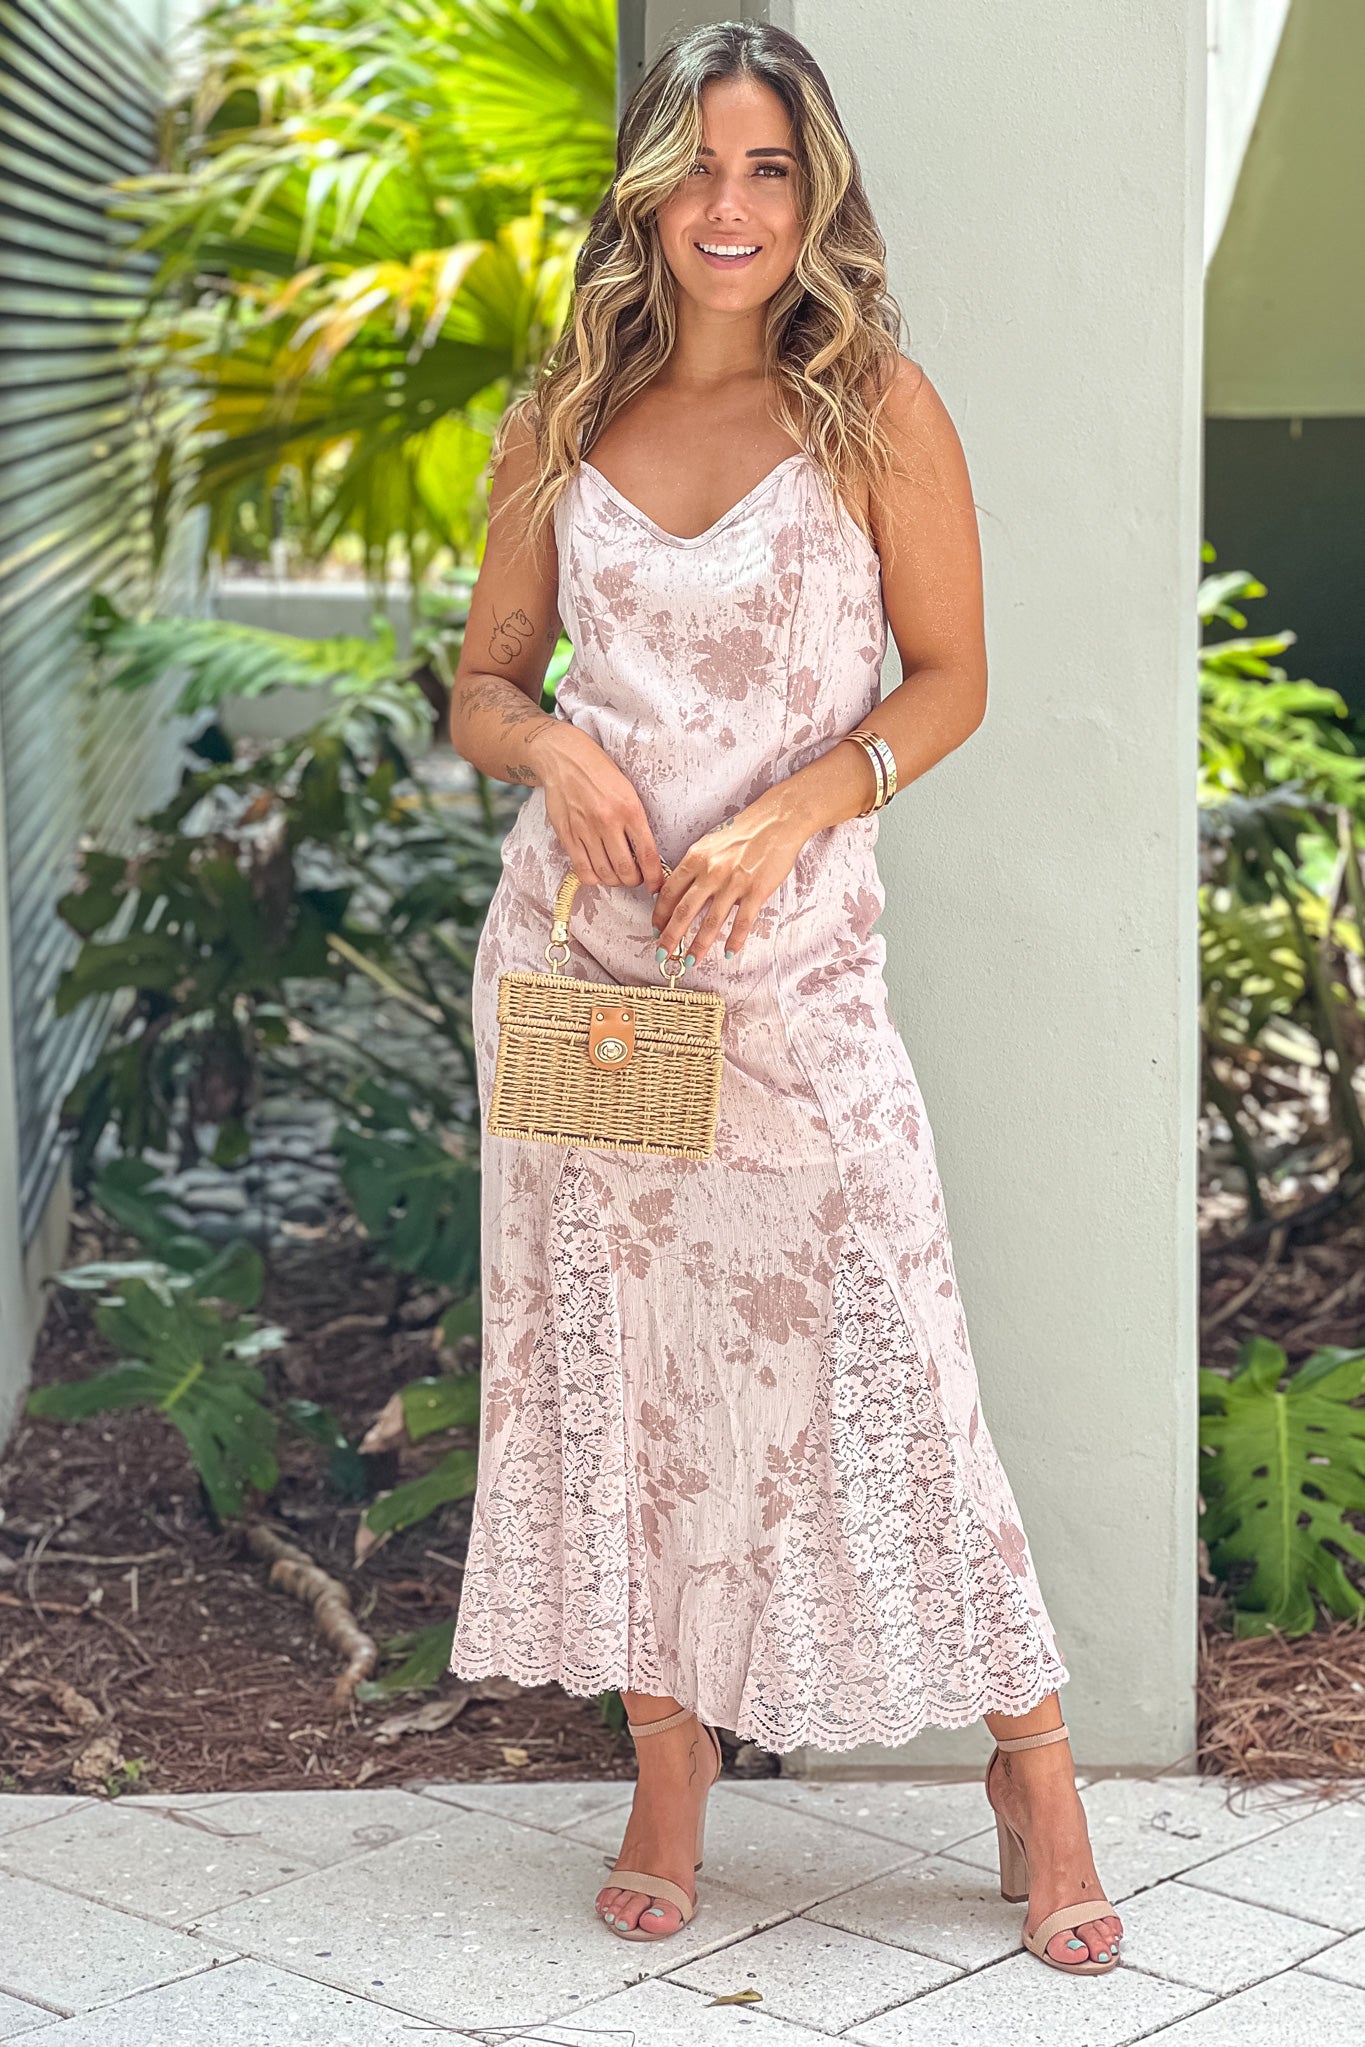 dusty pink floral dress with lace detail